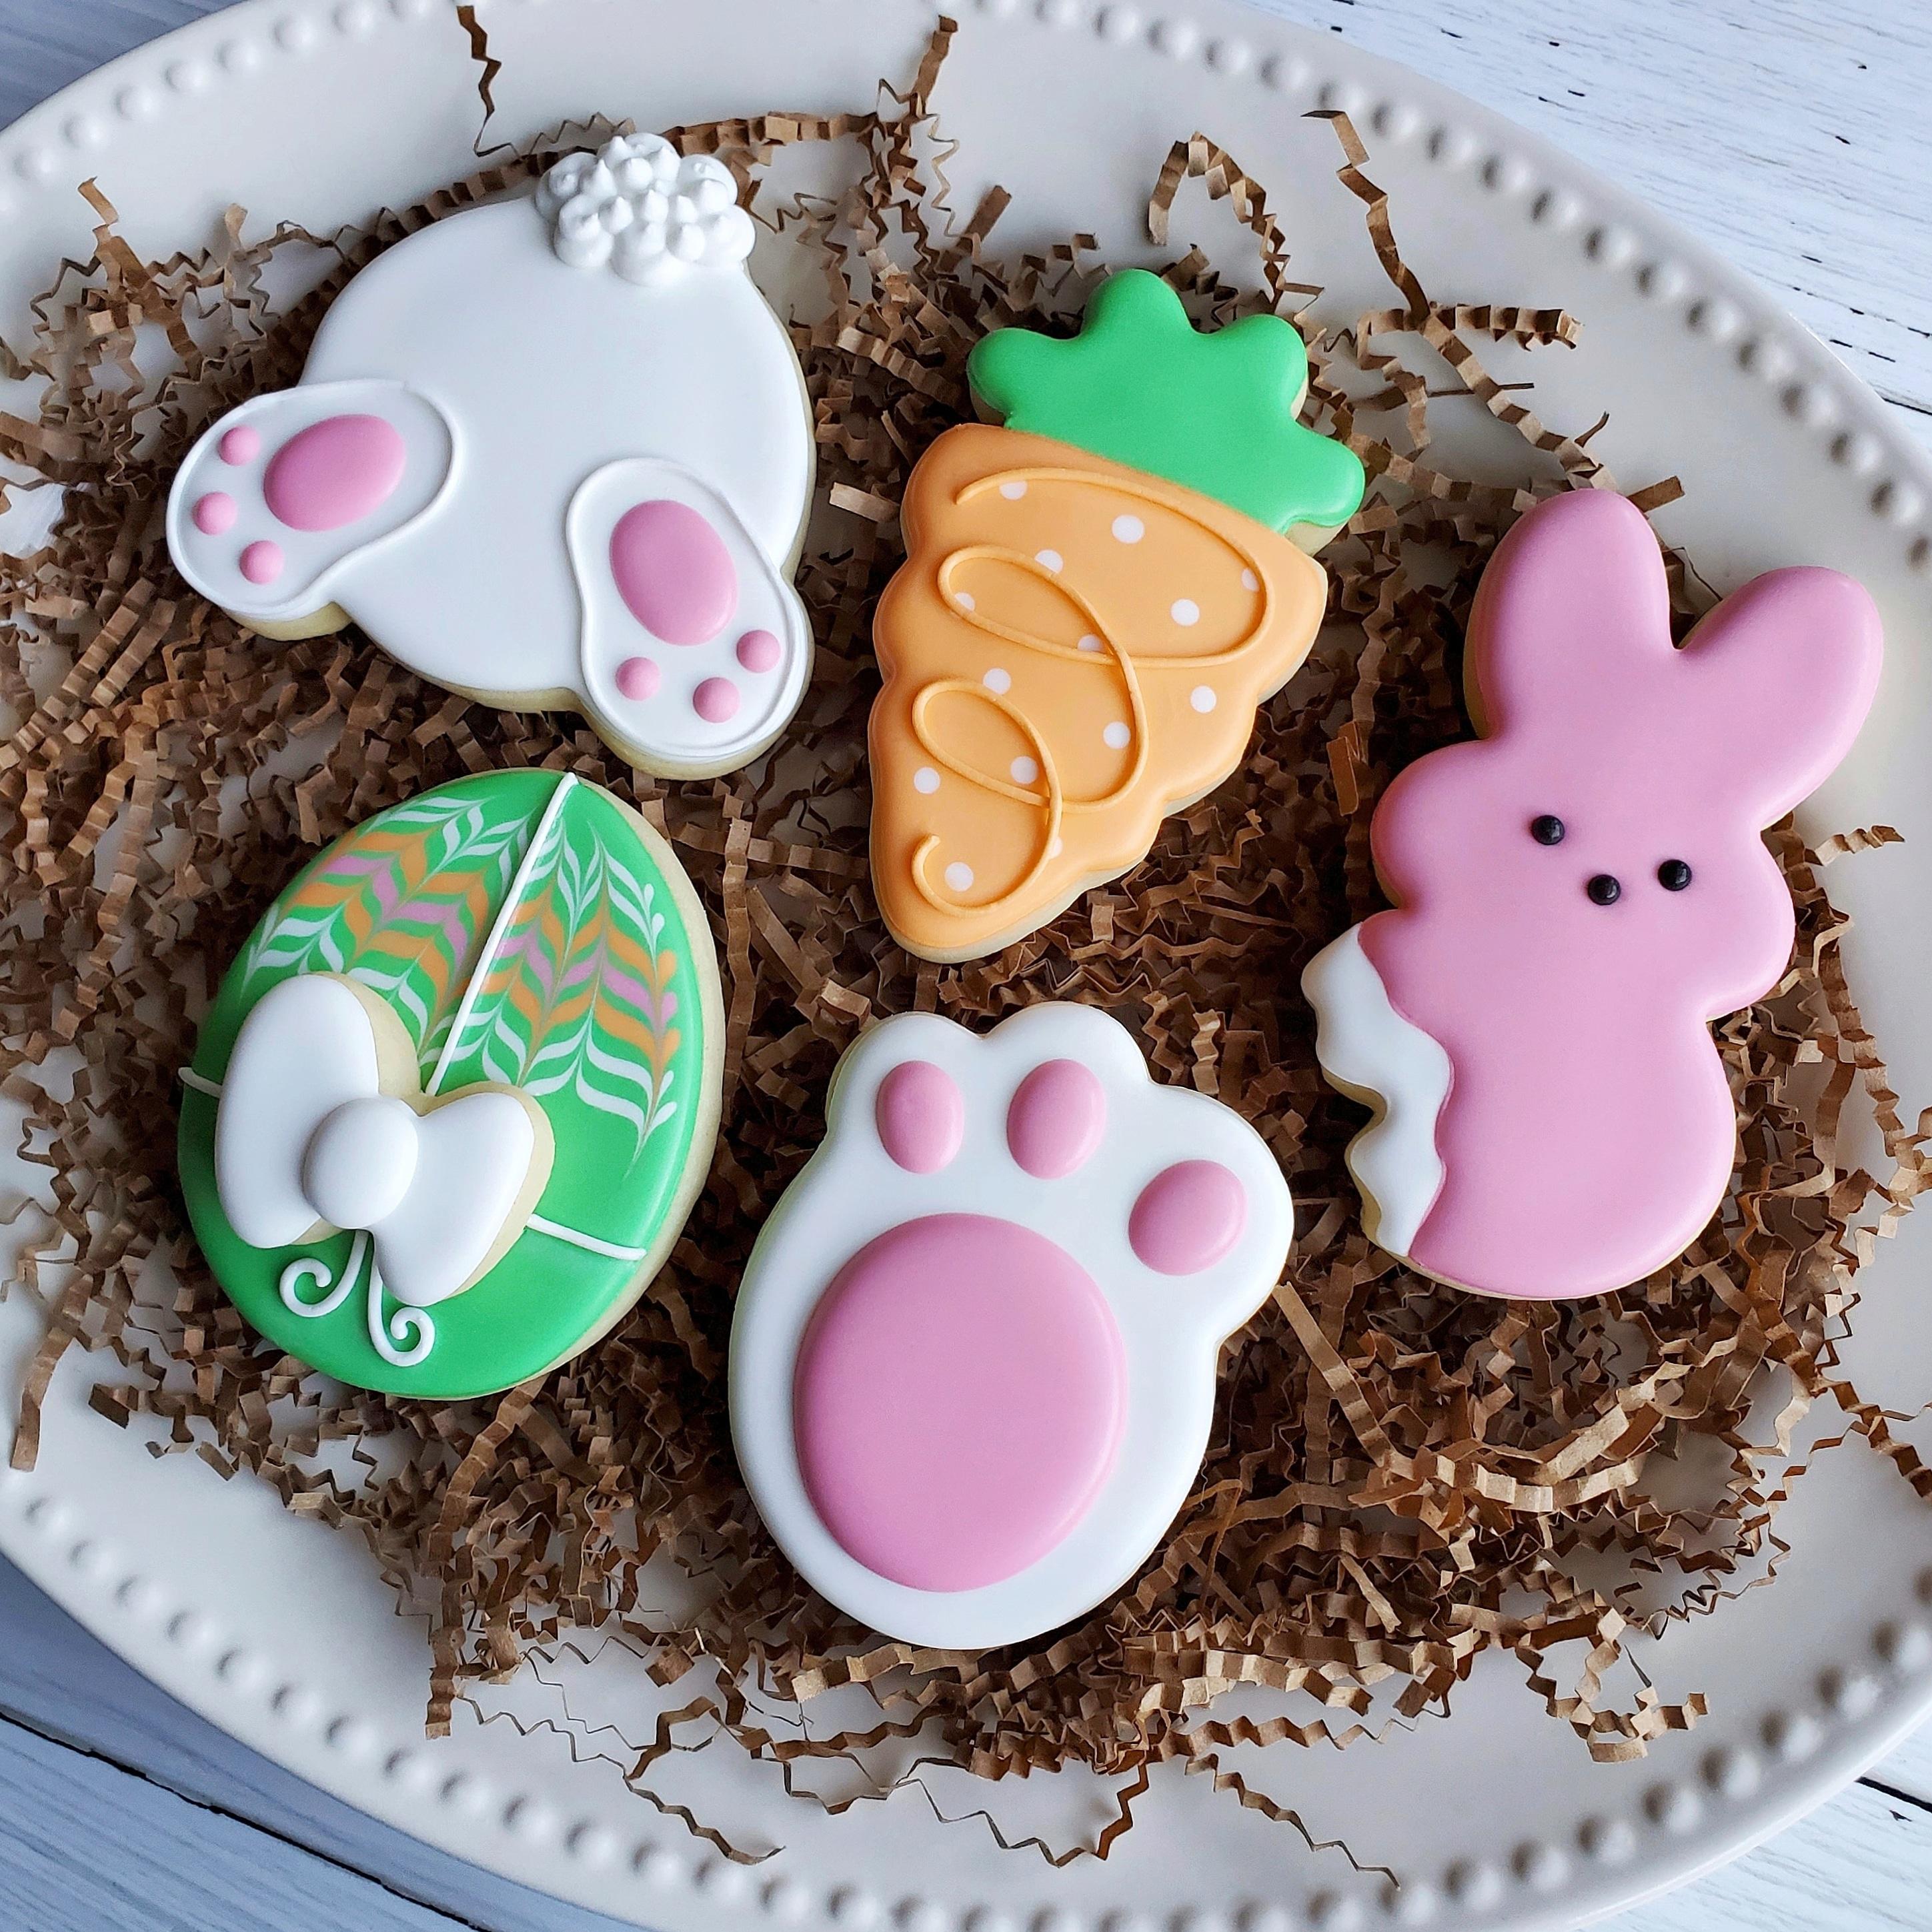 Royal Icing Cookie Decorating Classes Near Me cookie ideas